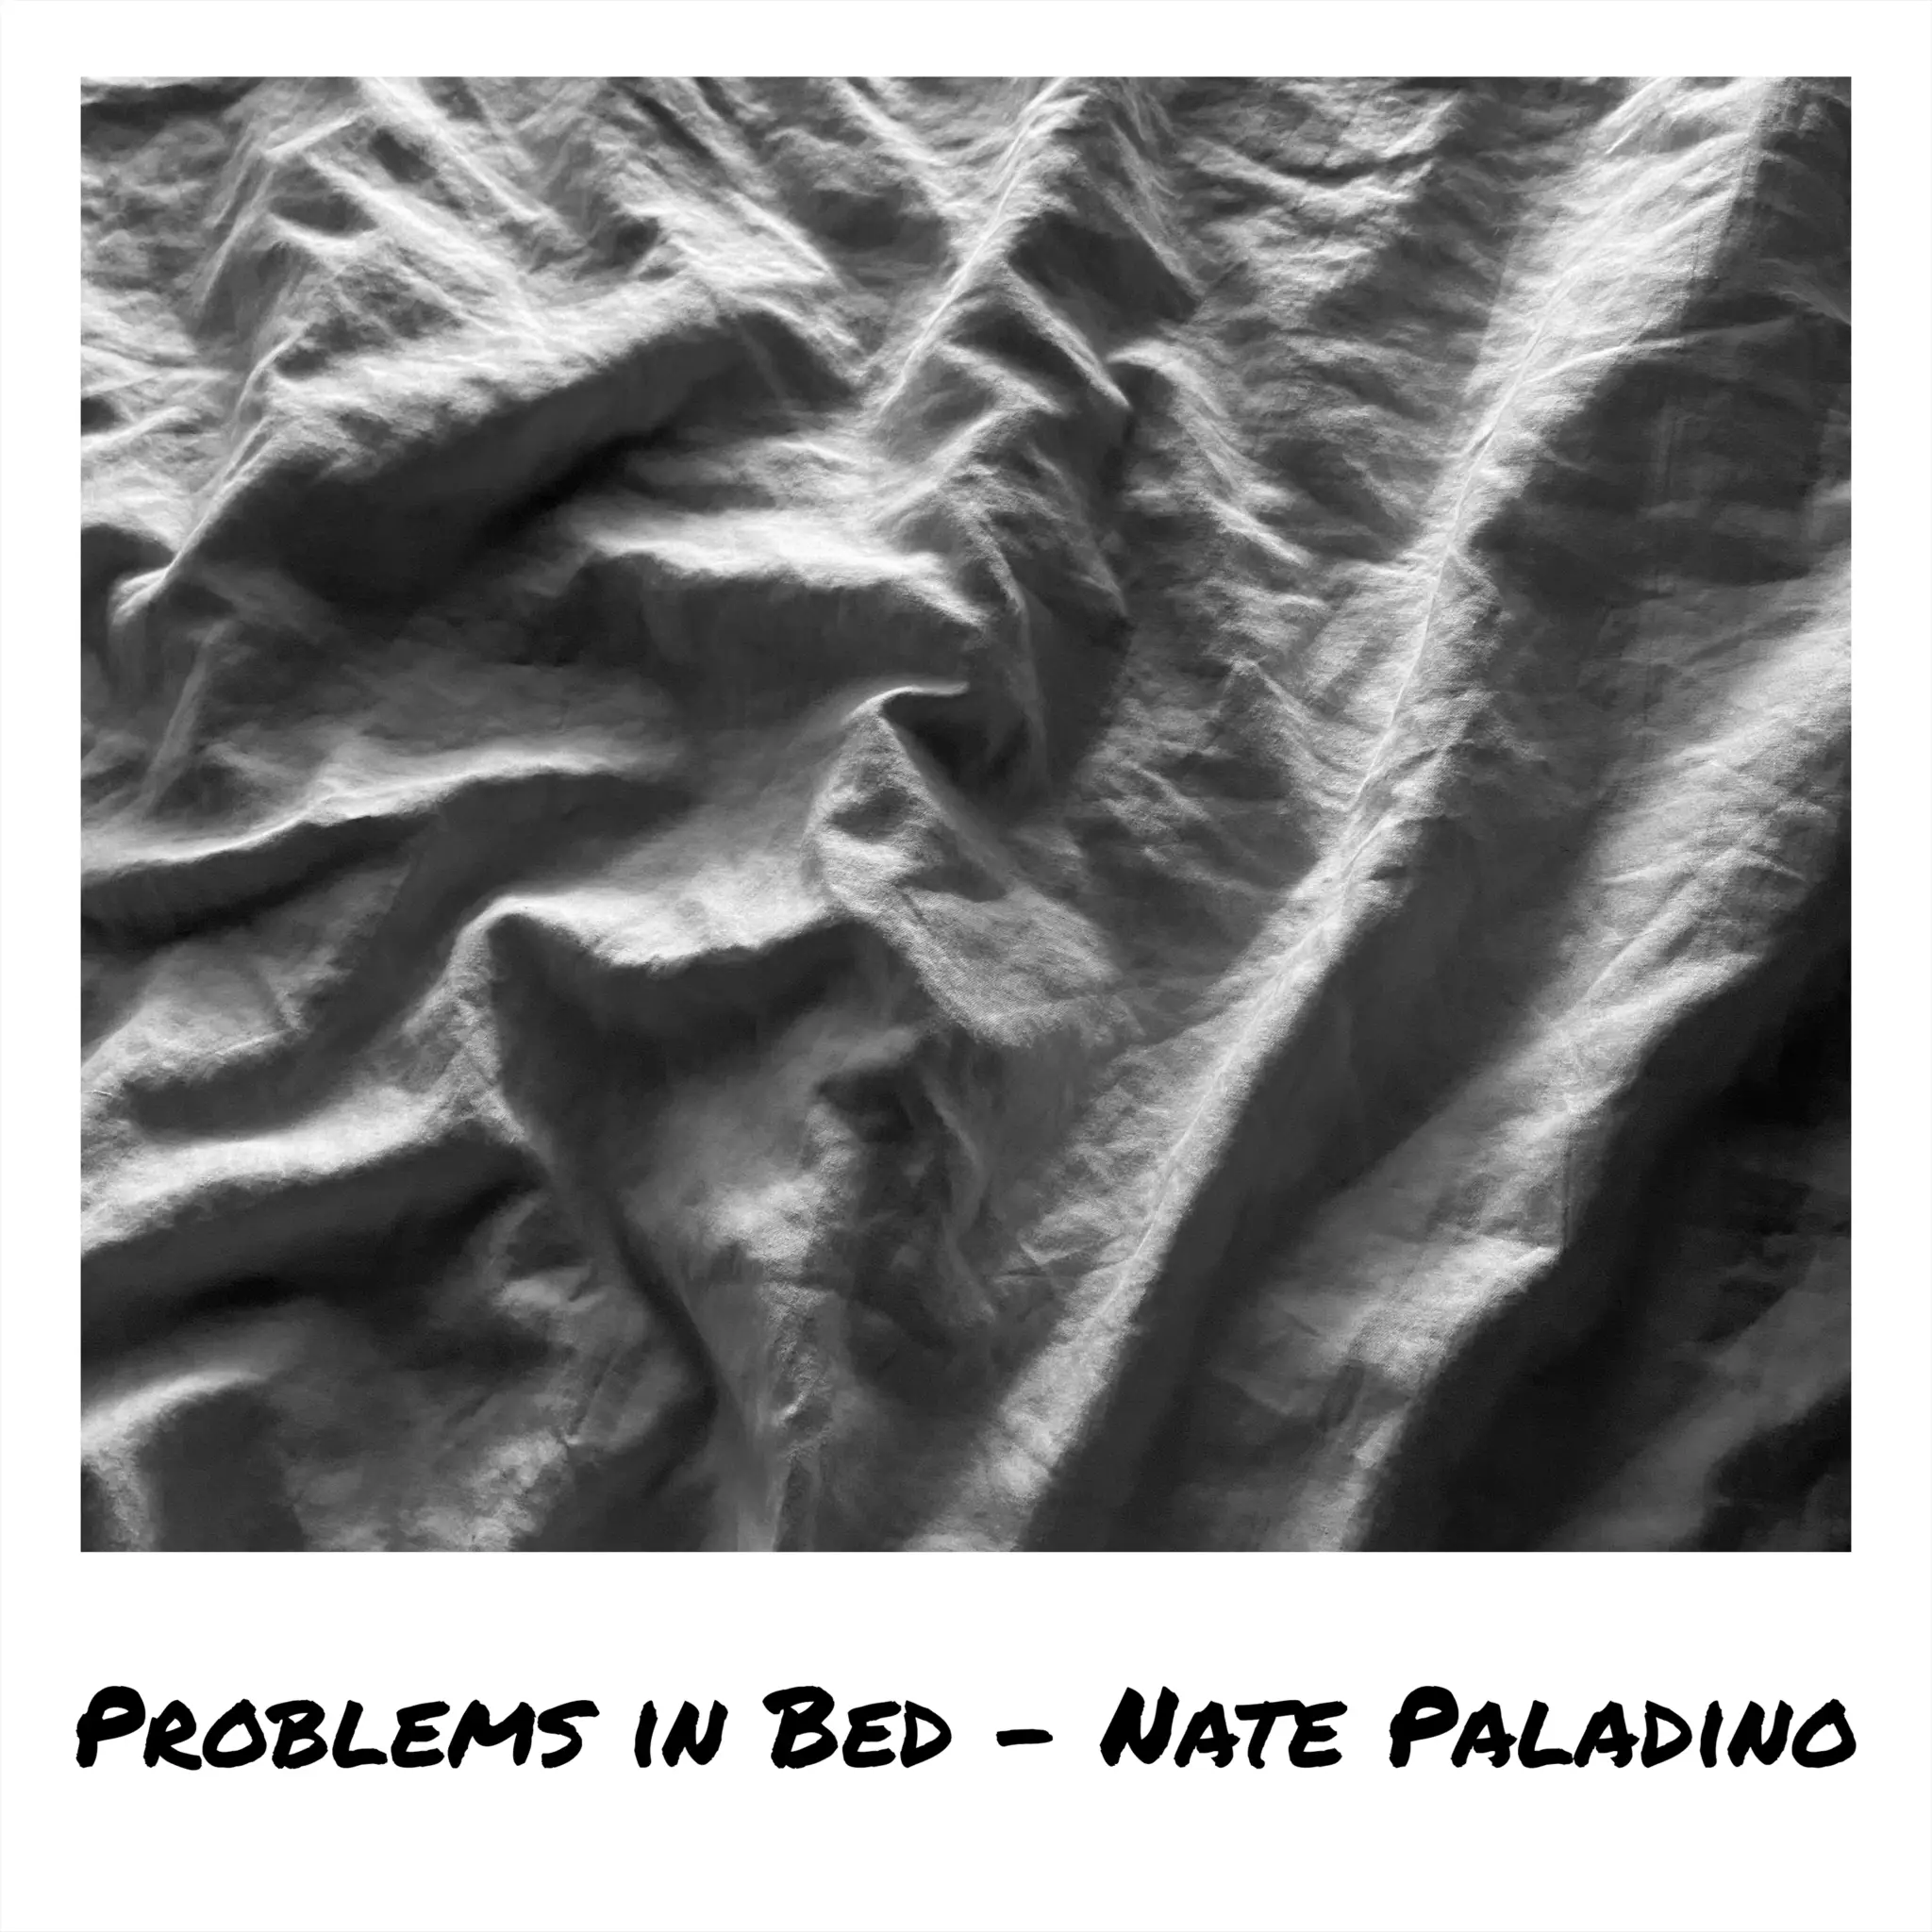 Nate Paladino - "Problems In Bed" Review | Opinions | LIVING LIFE FEARLESS